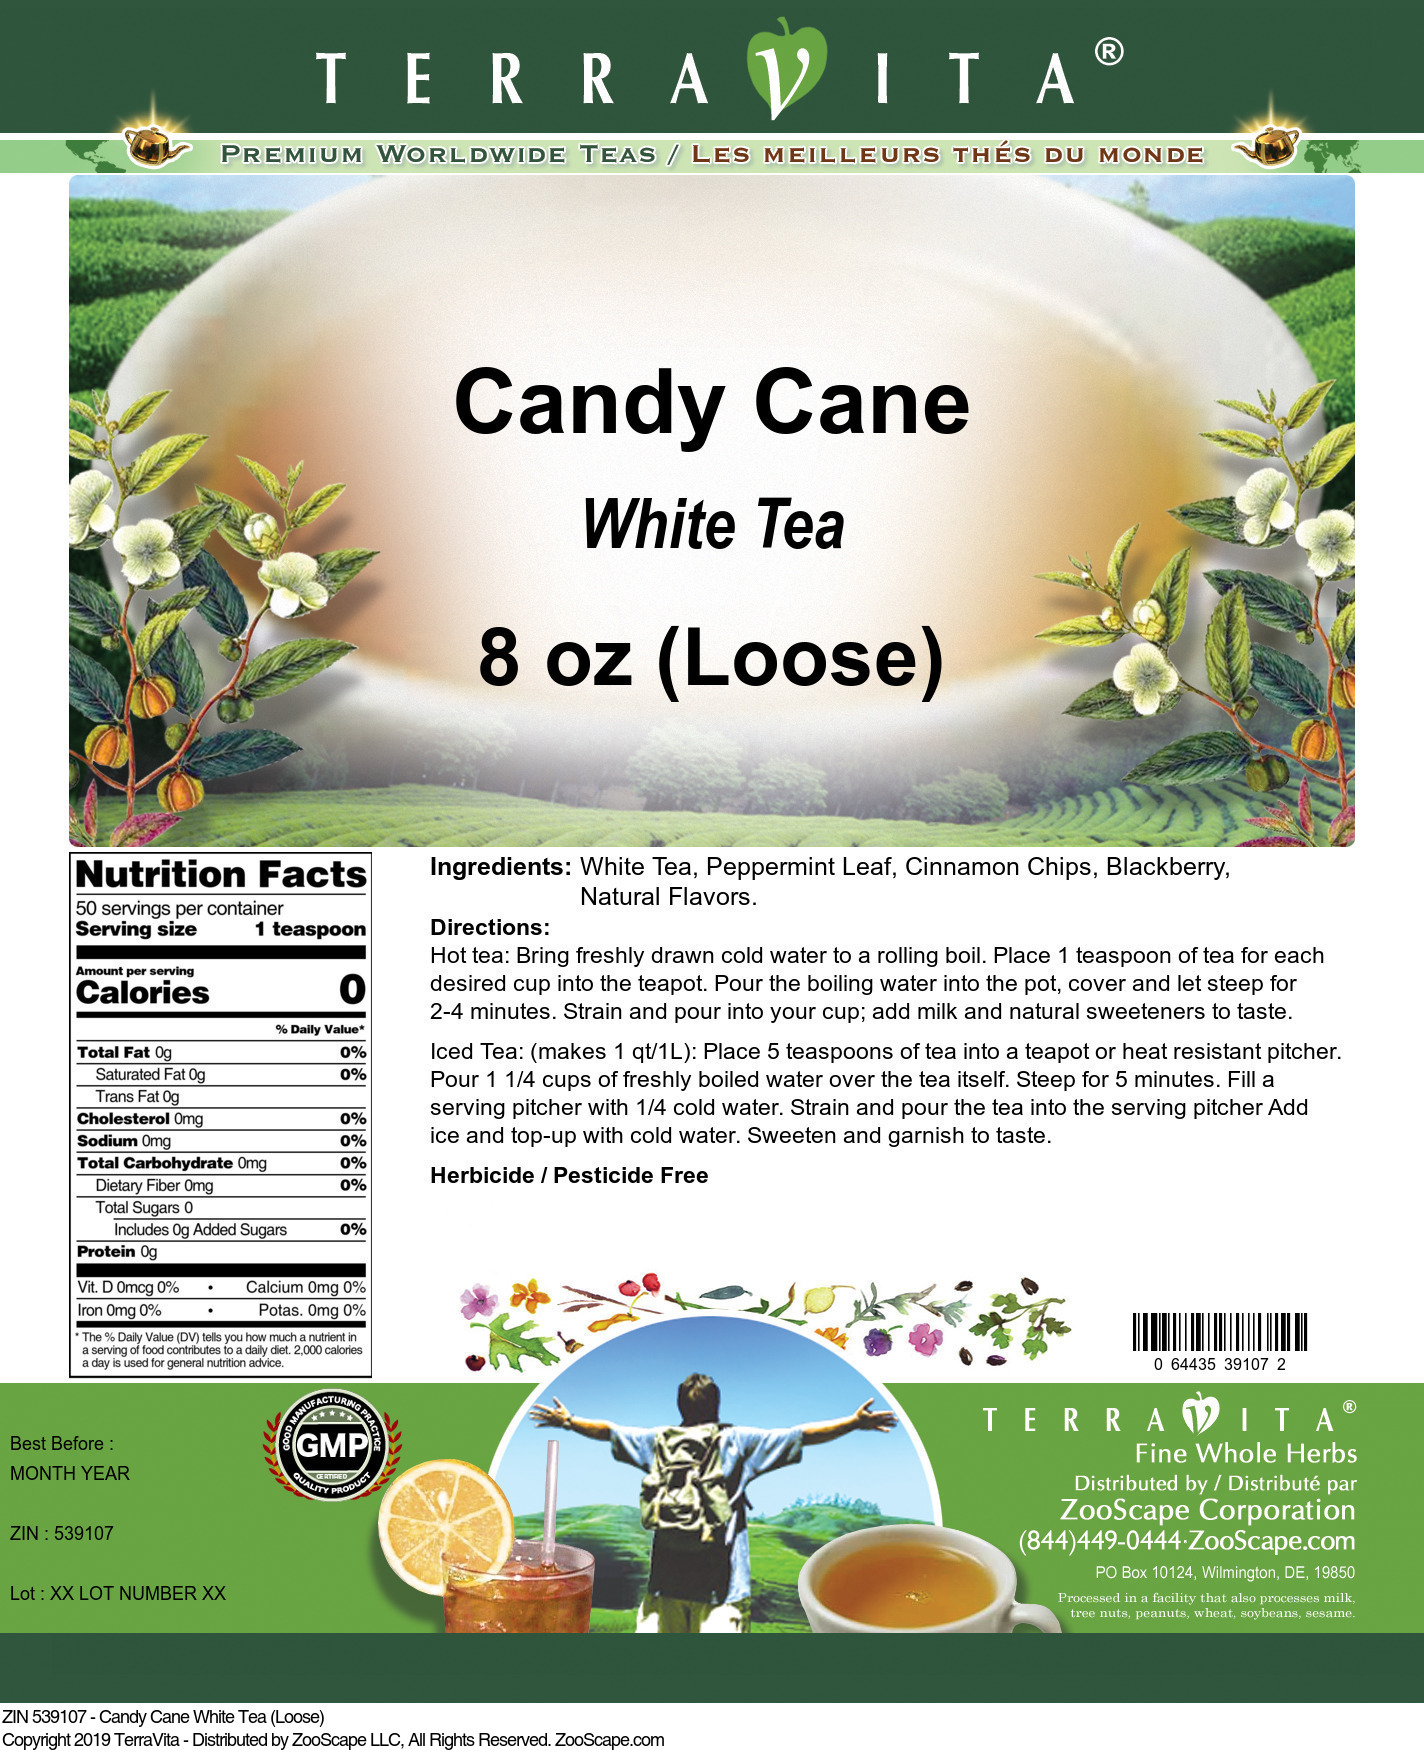 Candy Cane White Tea (Loose) - Label